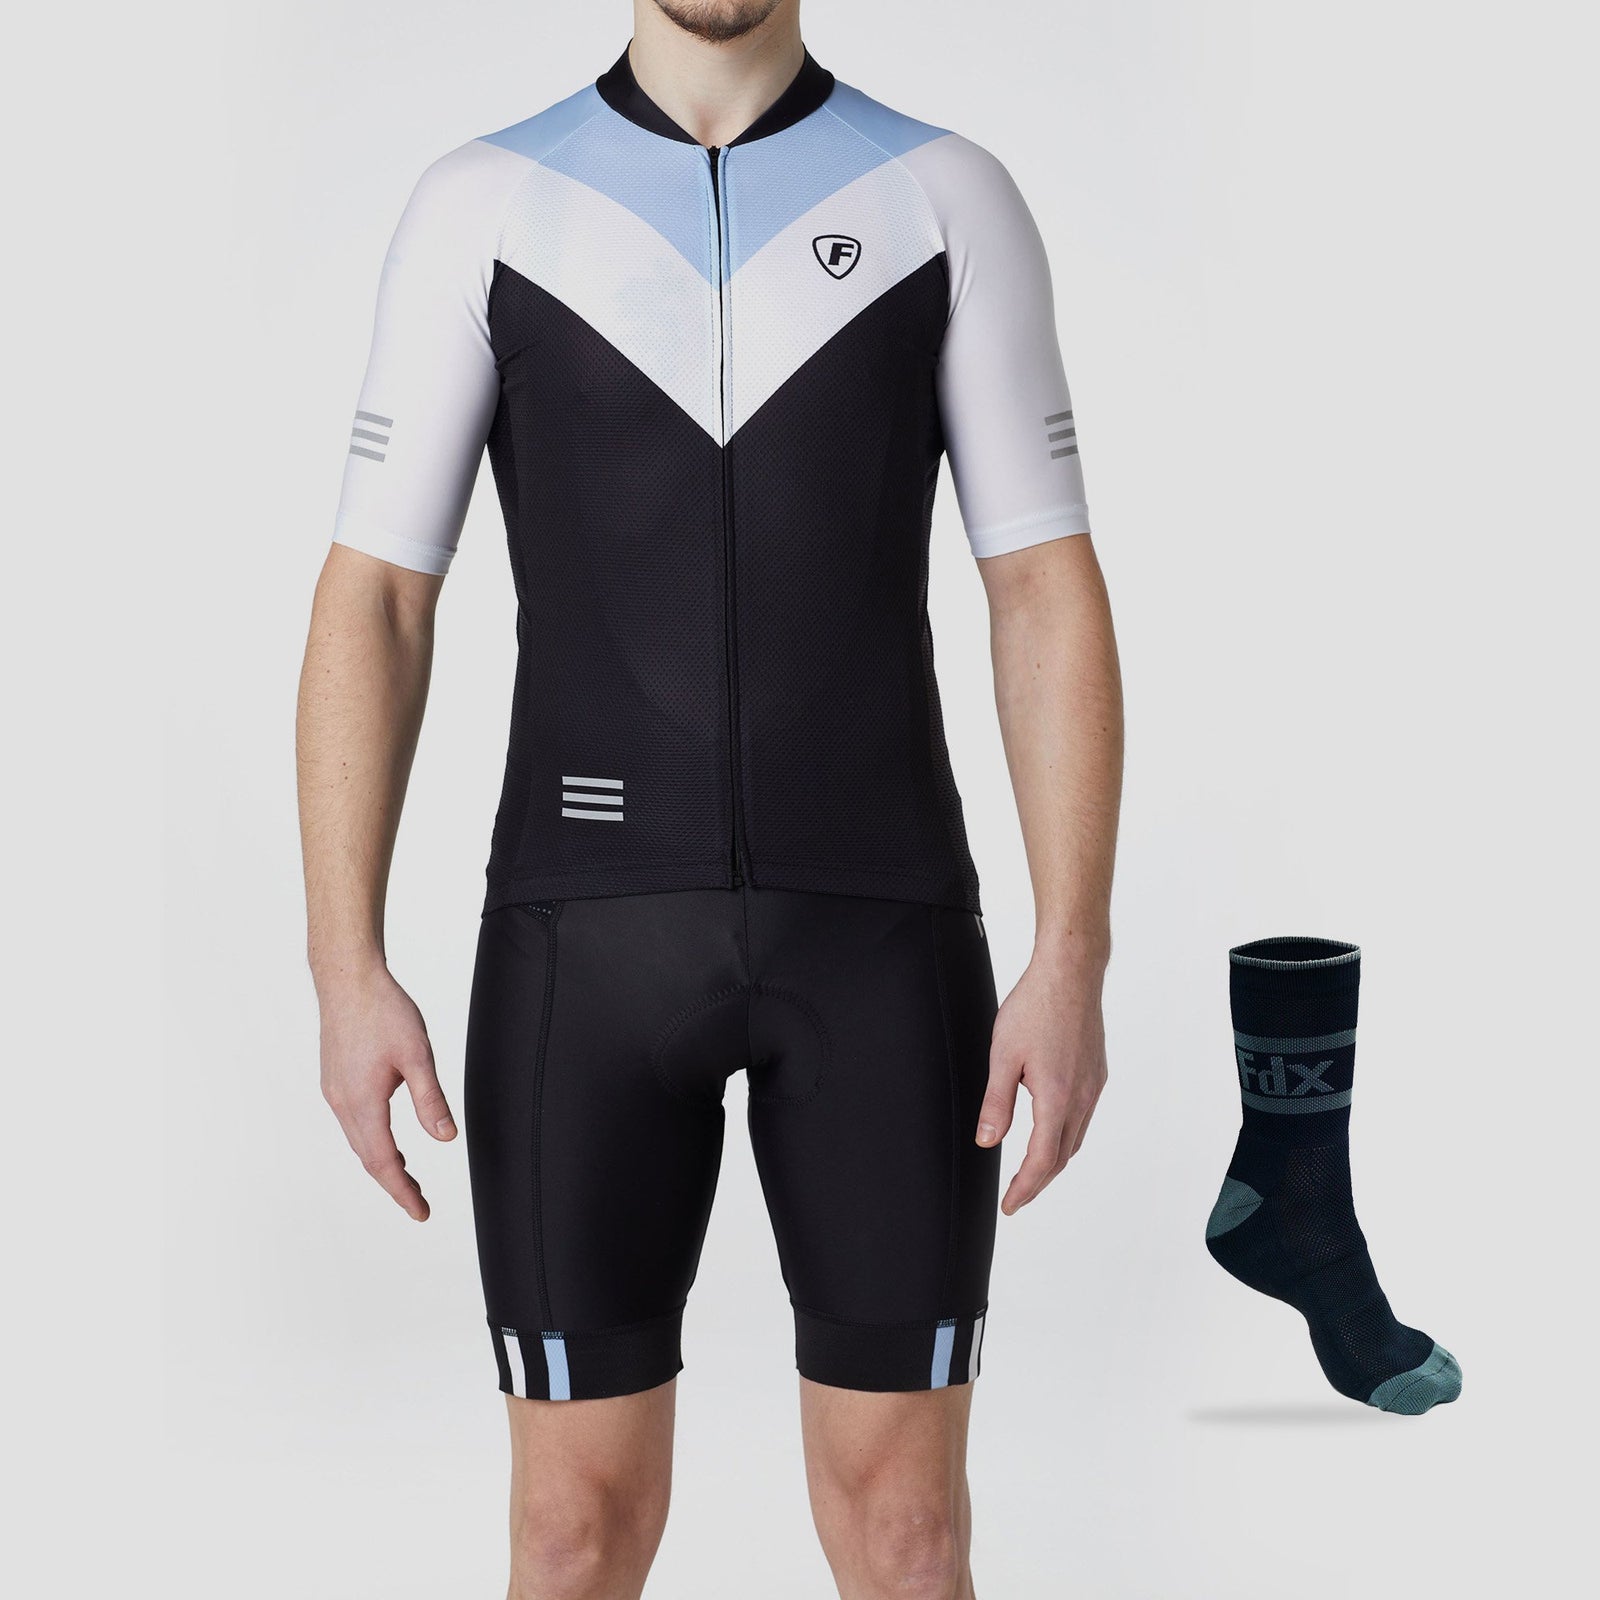 cycling suits for sale